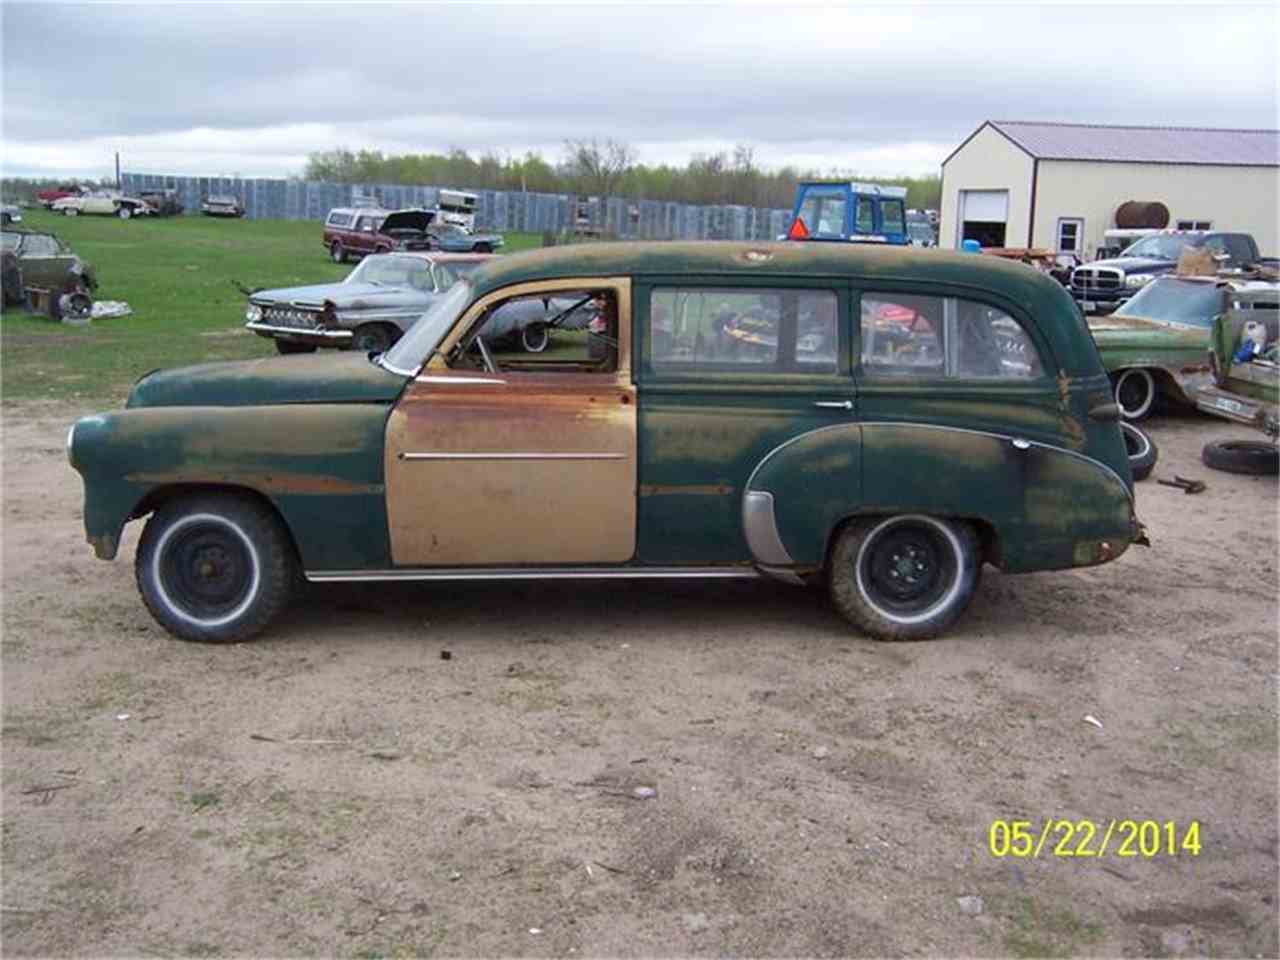 1951 Chevrolet Station Wagon For Sale Classiccars Cc 535184 truly classic cars for sale mn